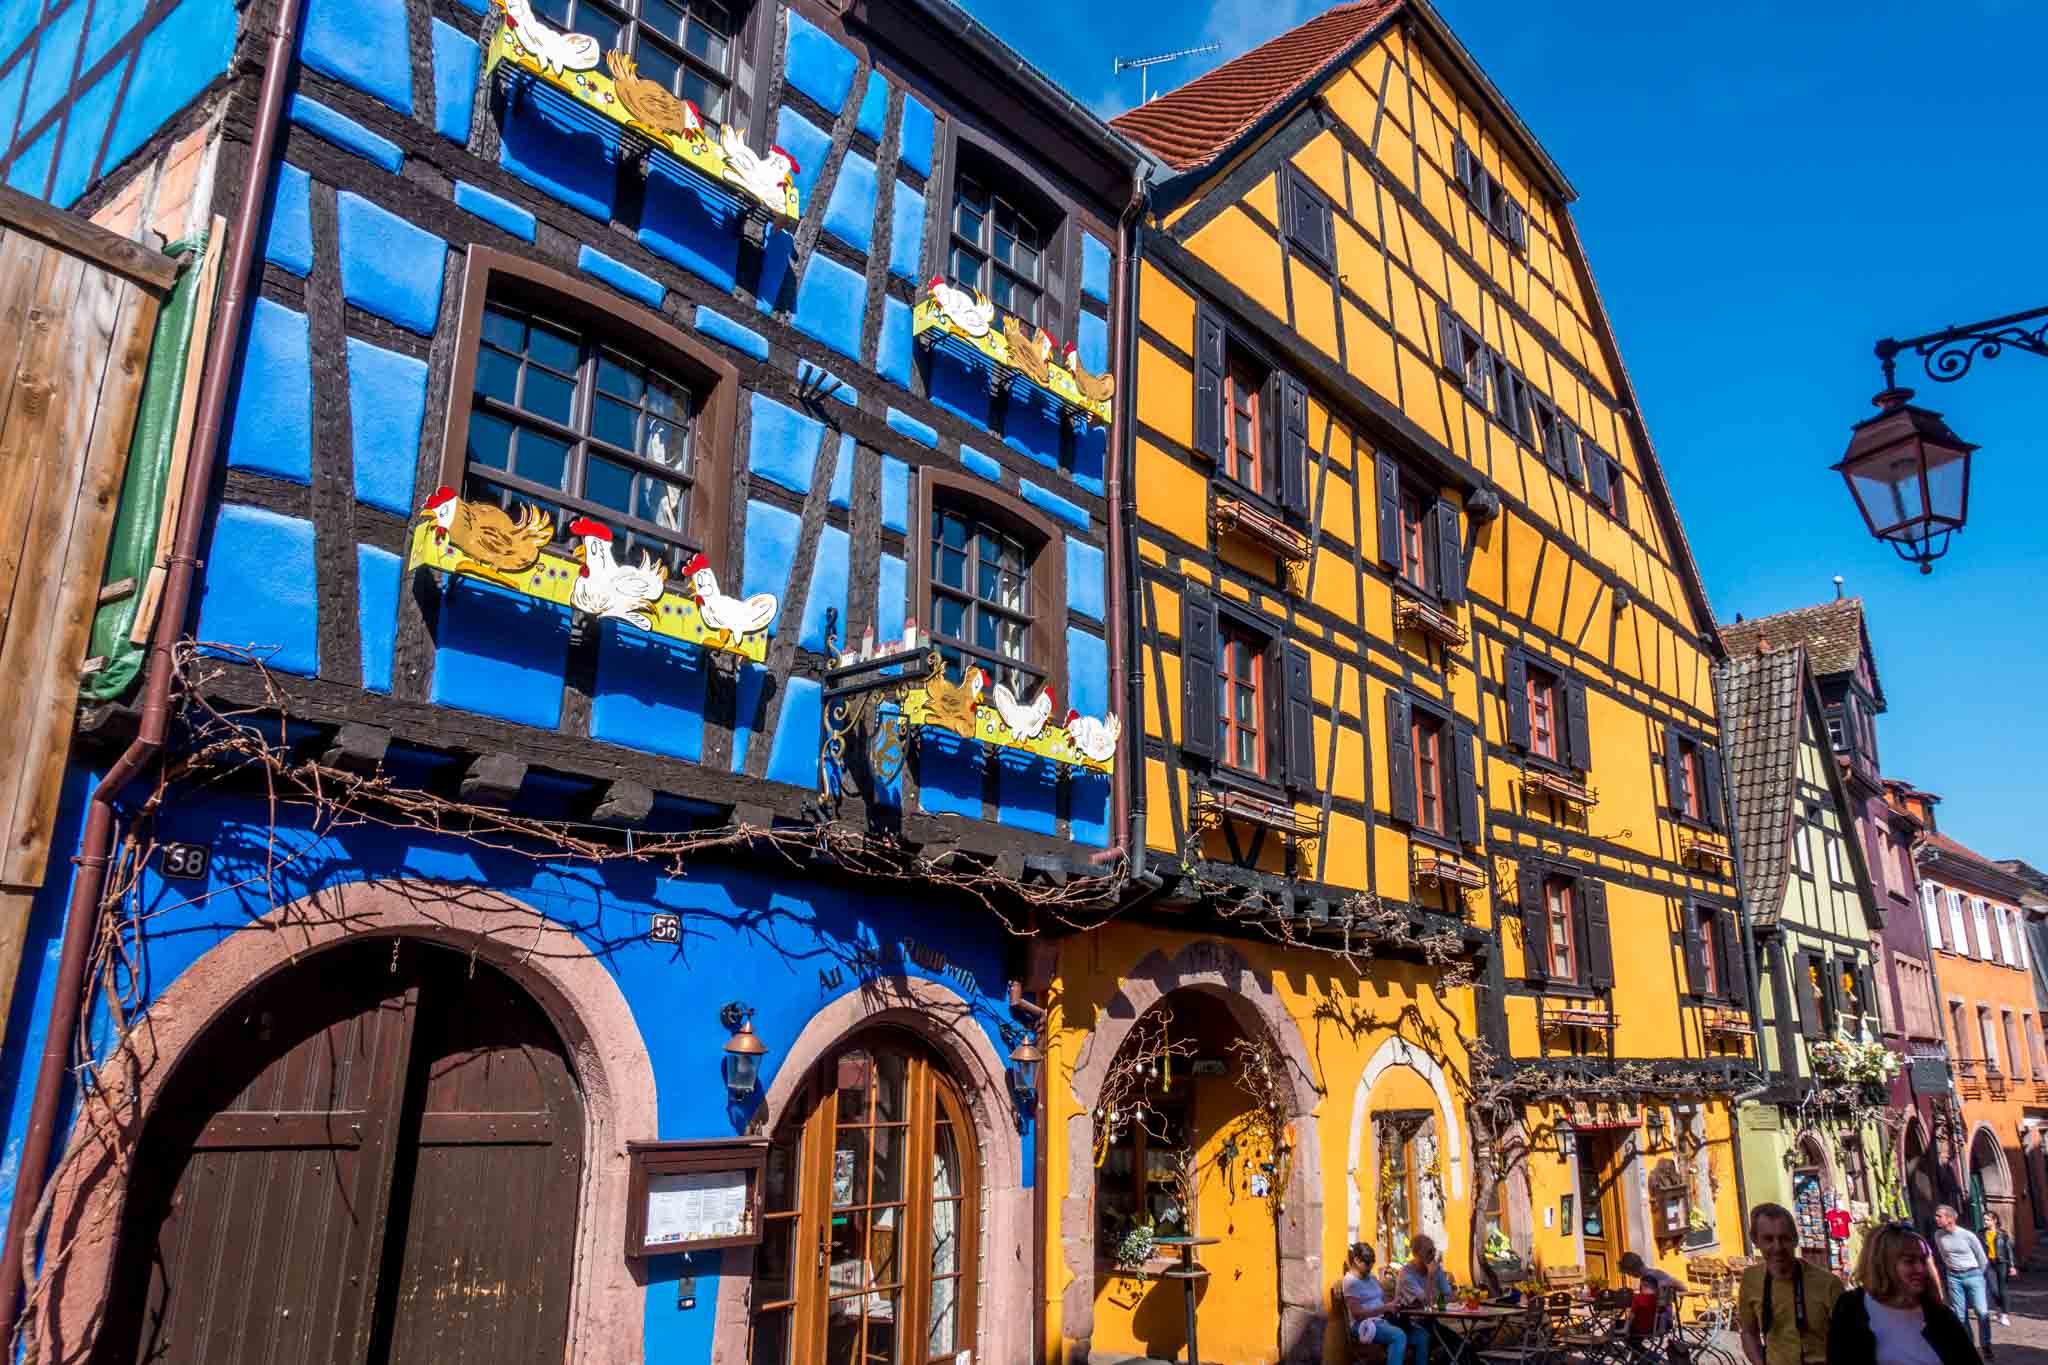 Medieval buildings decorated with spring theme